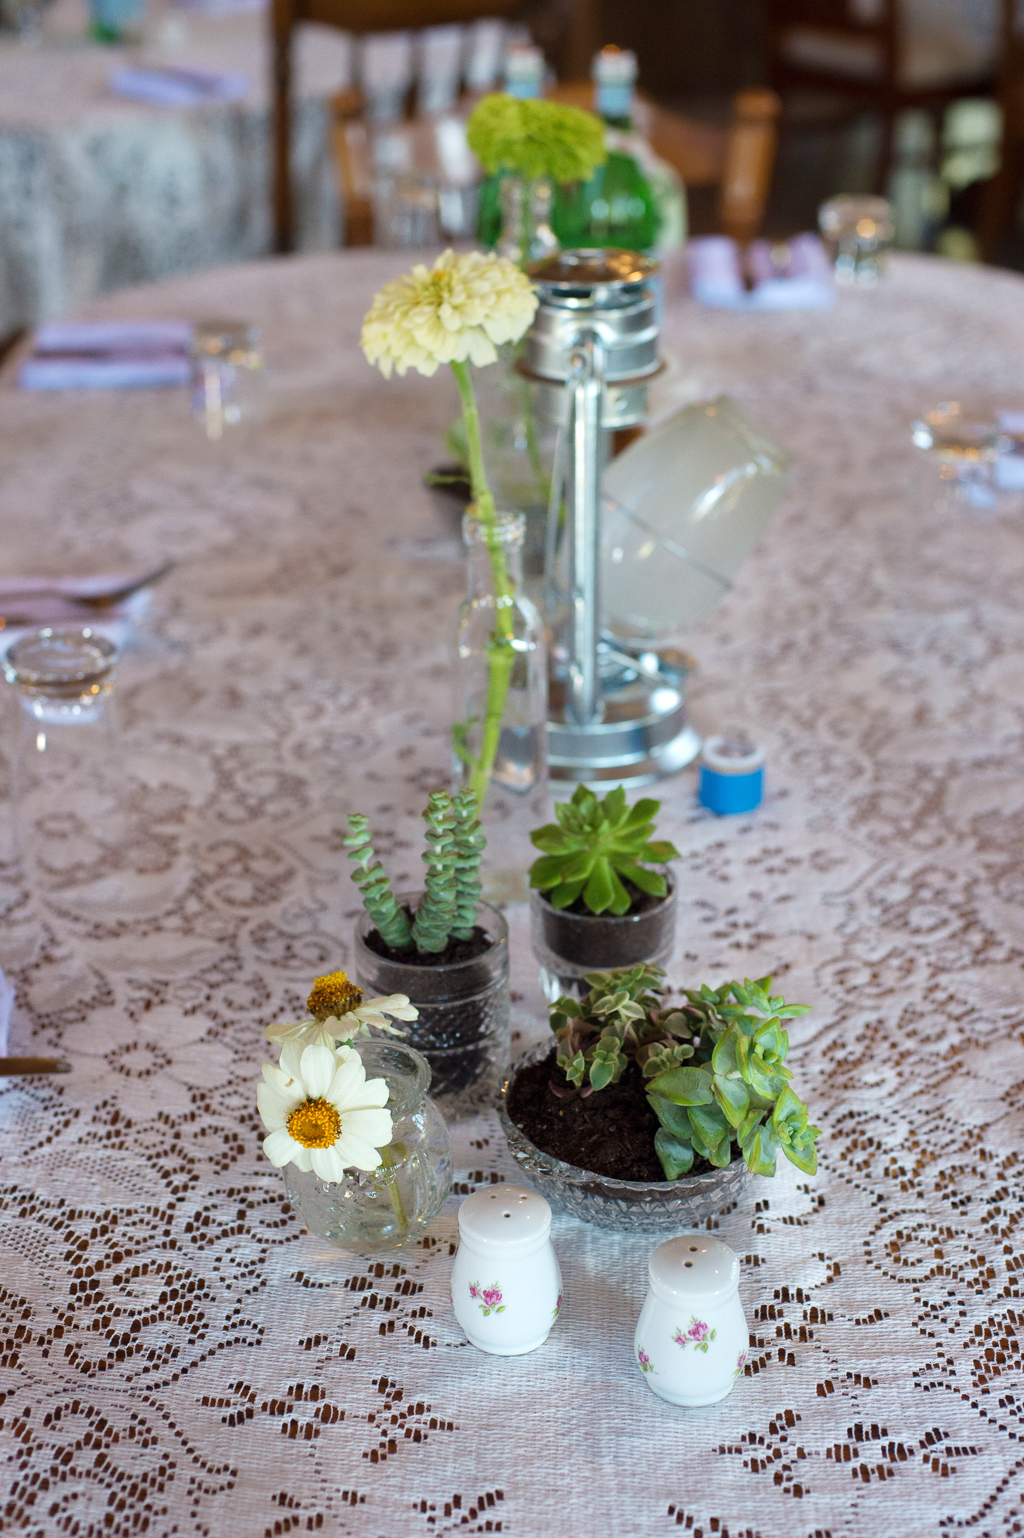 flowers in small glass bottles line the lace covered table at a wedding reception